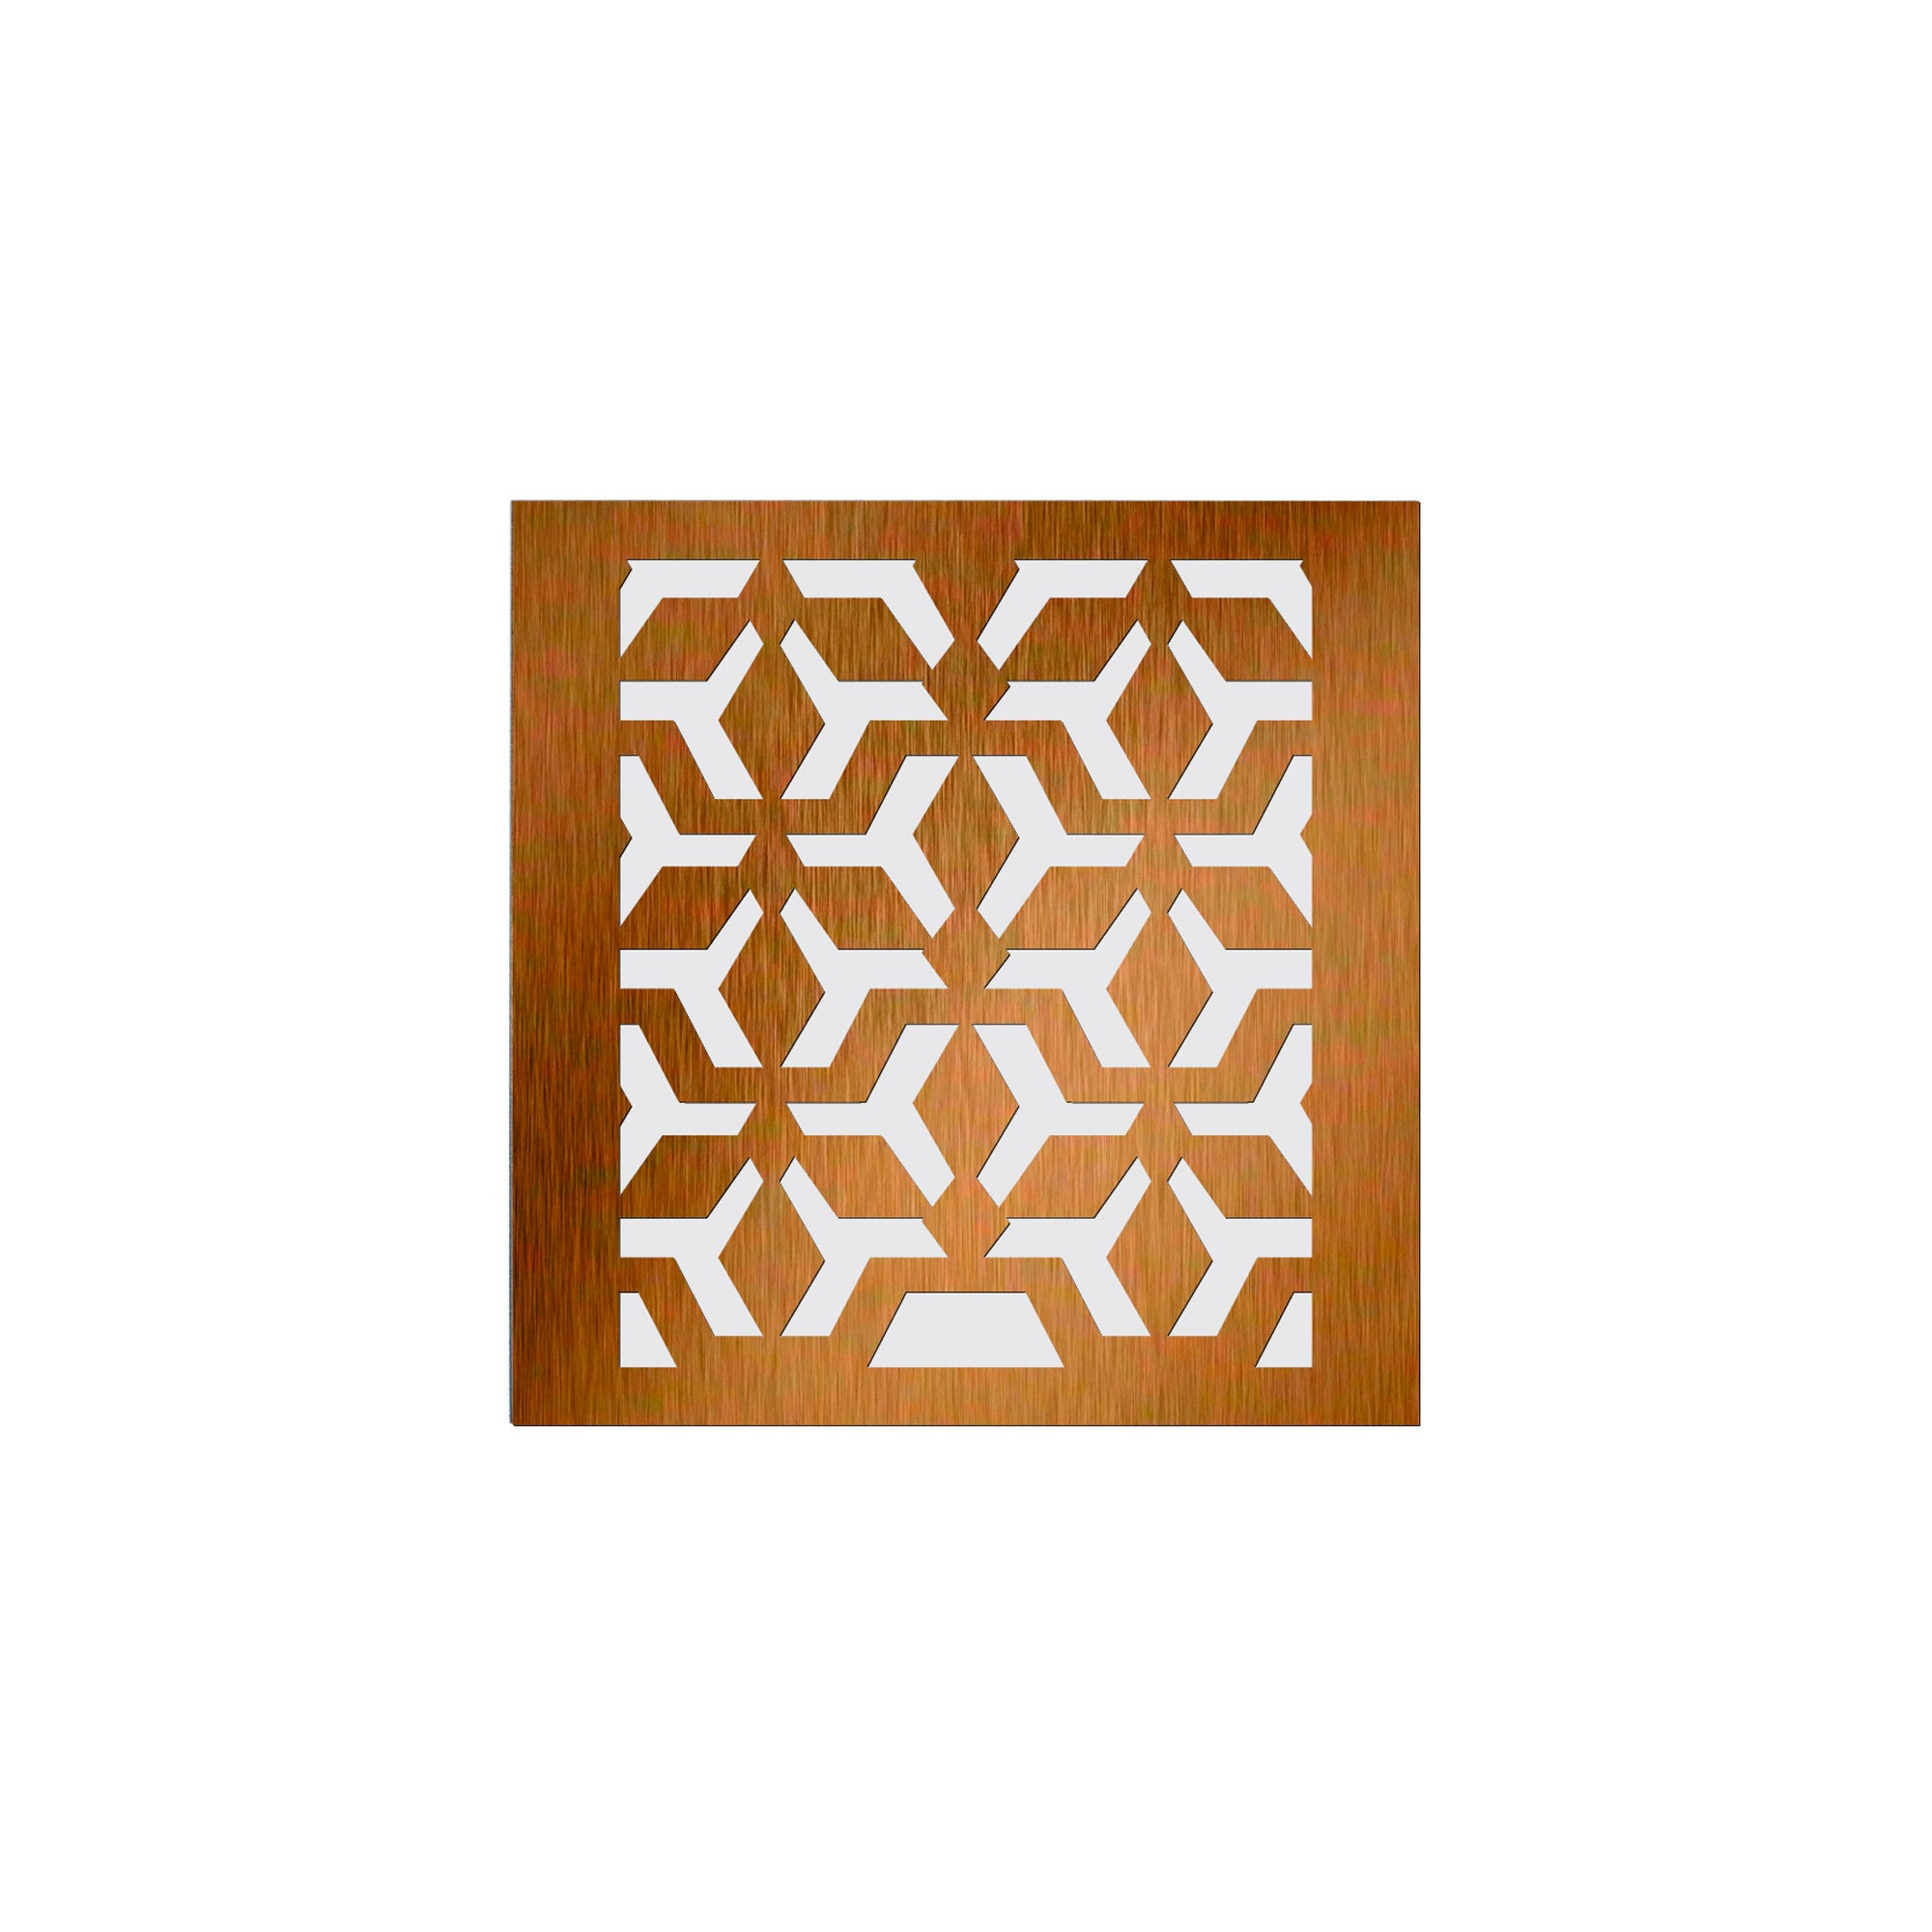 The Zen Wall Sconce from Seascape Fixtures, Aztec style in gold color.